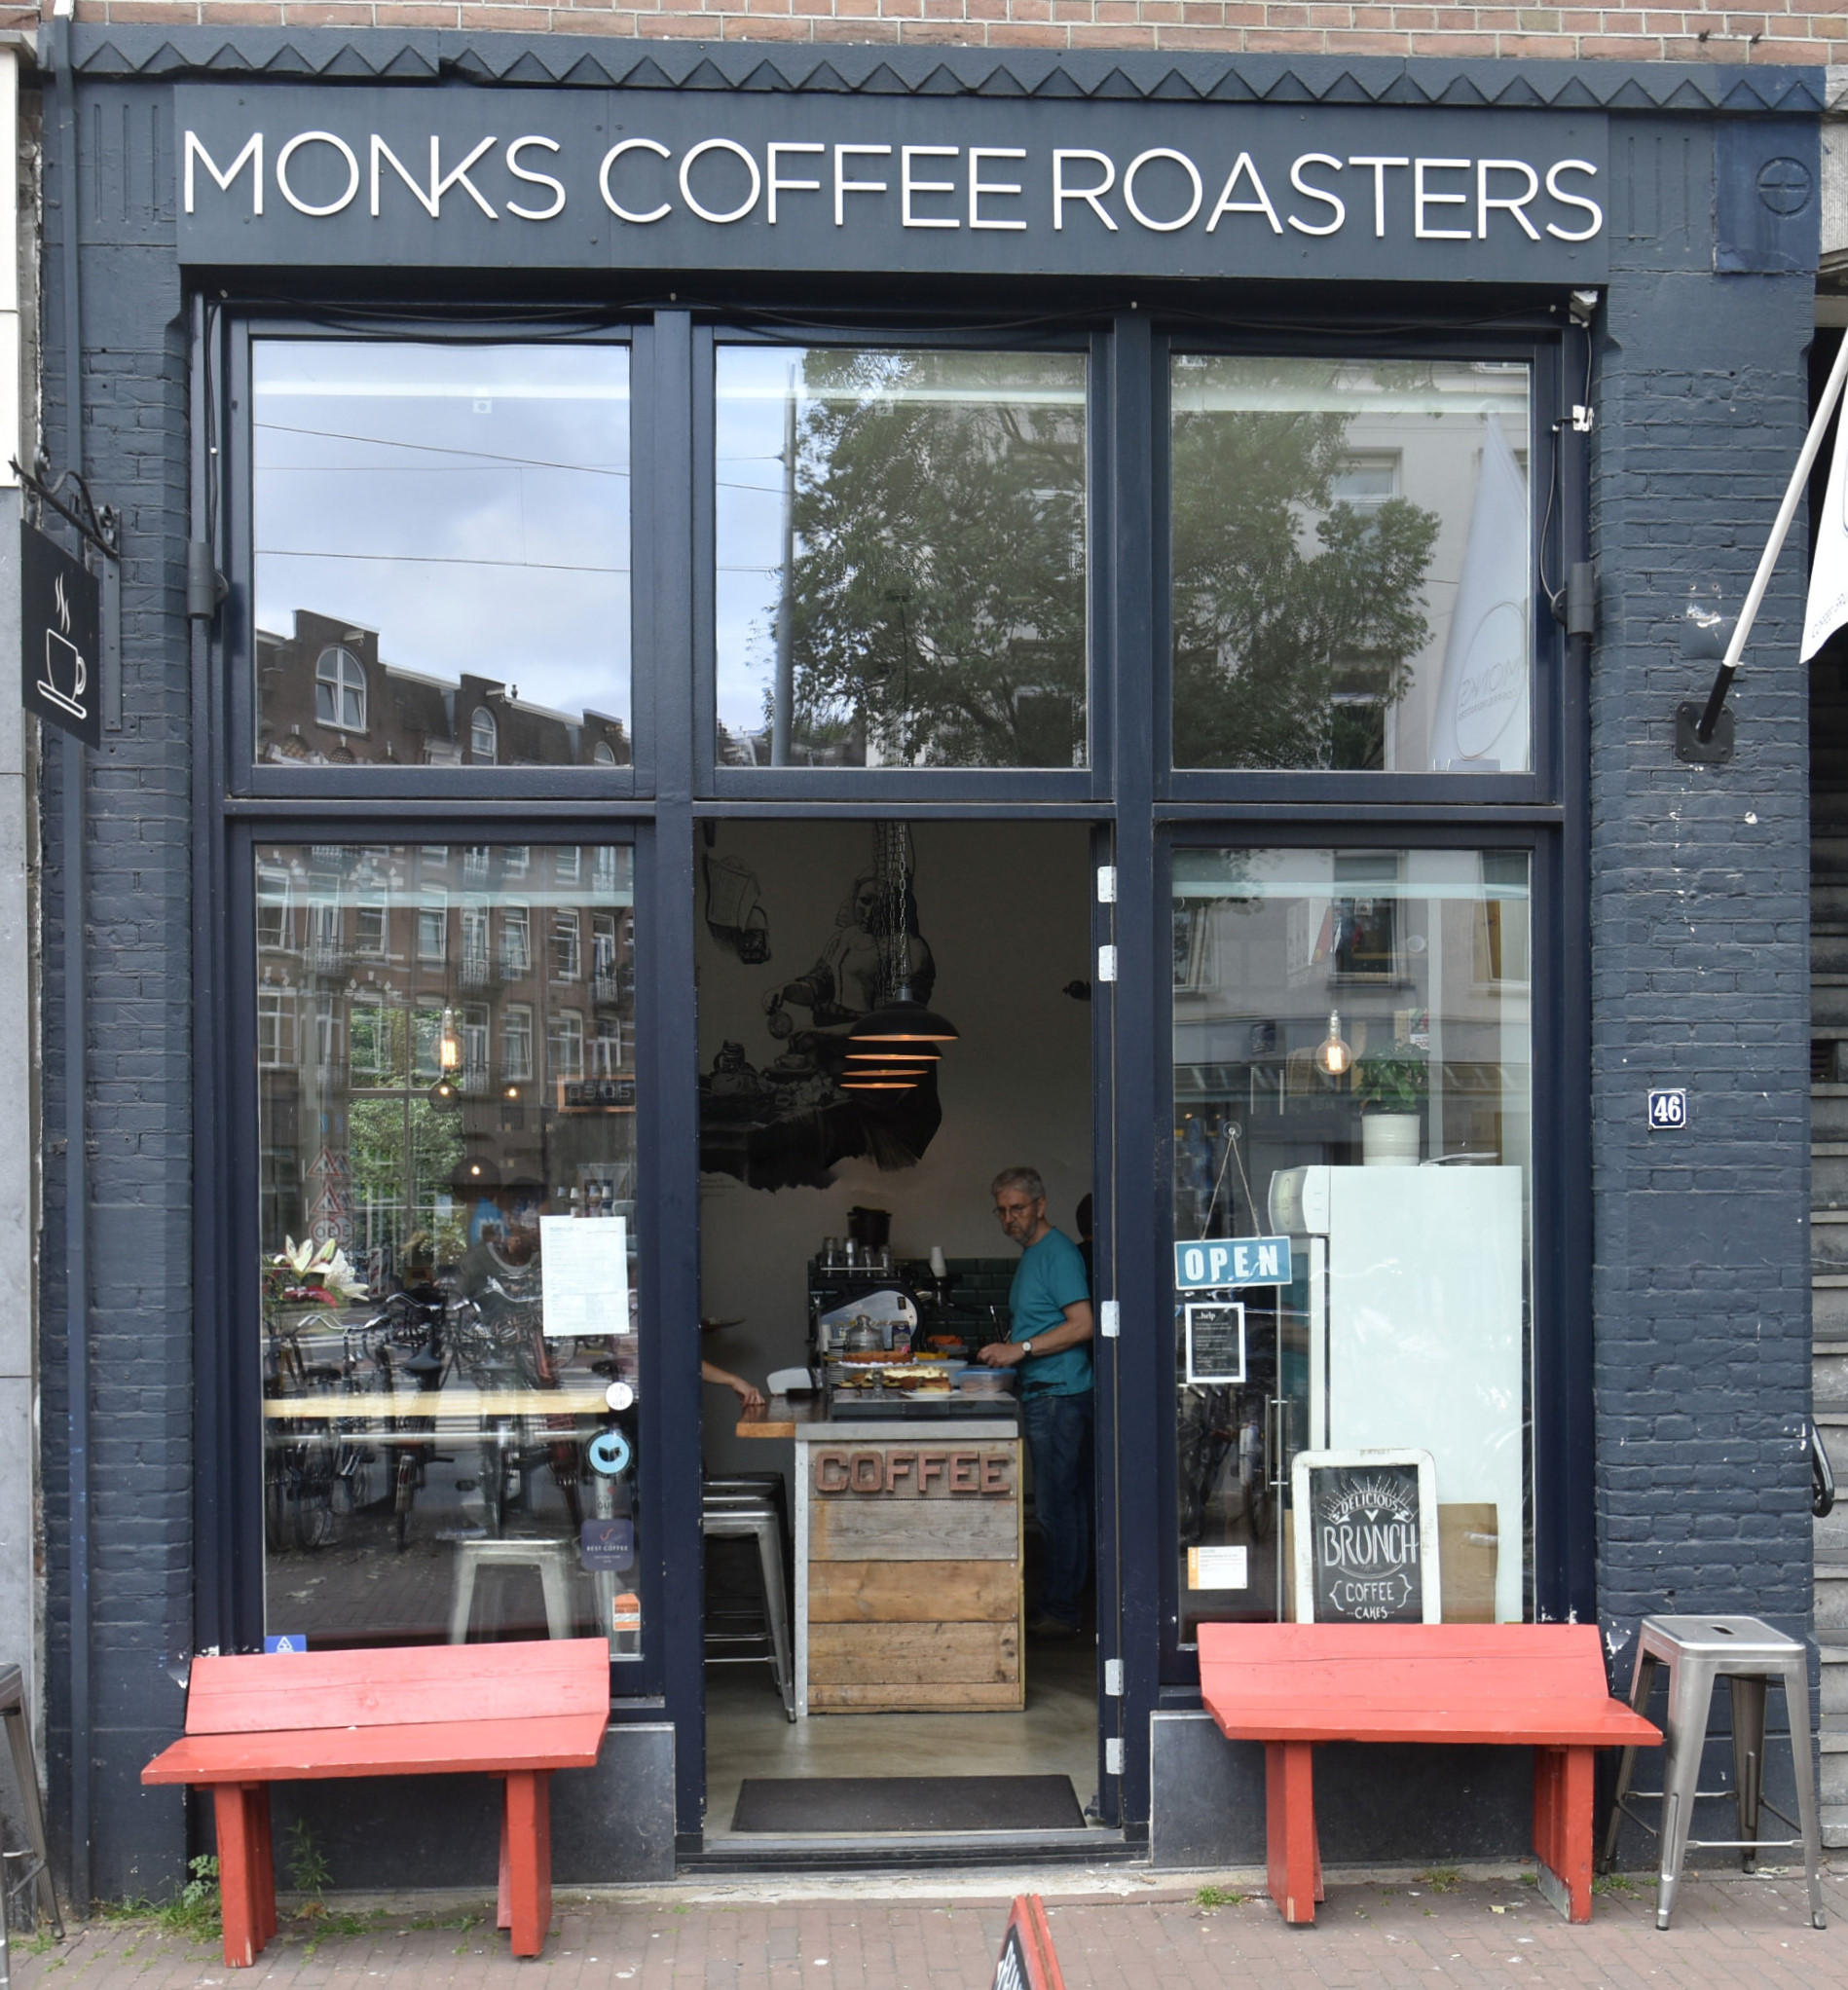 Monks Coffee Roasters on Bilderdijkstraat in Amsterdah, with benches either side of the door and the counter clearly visible.